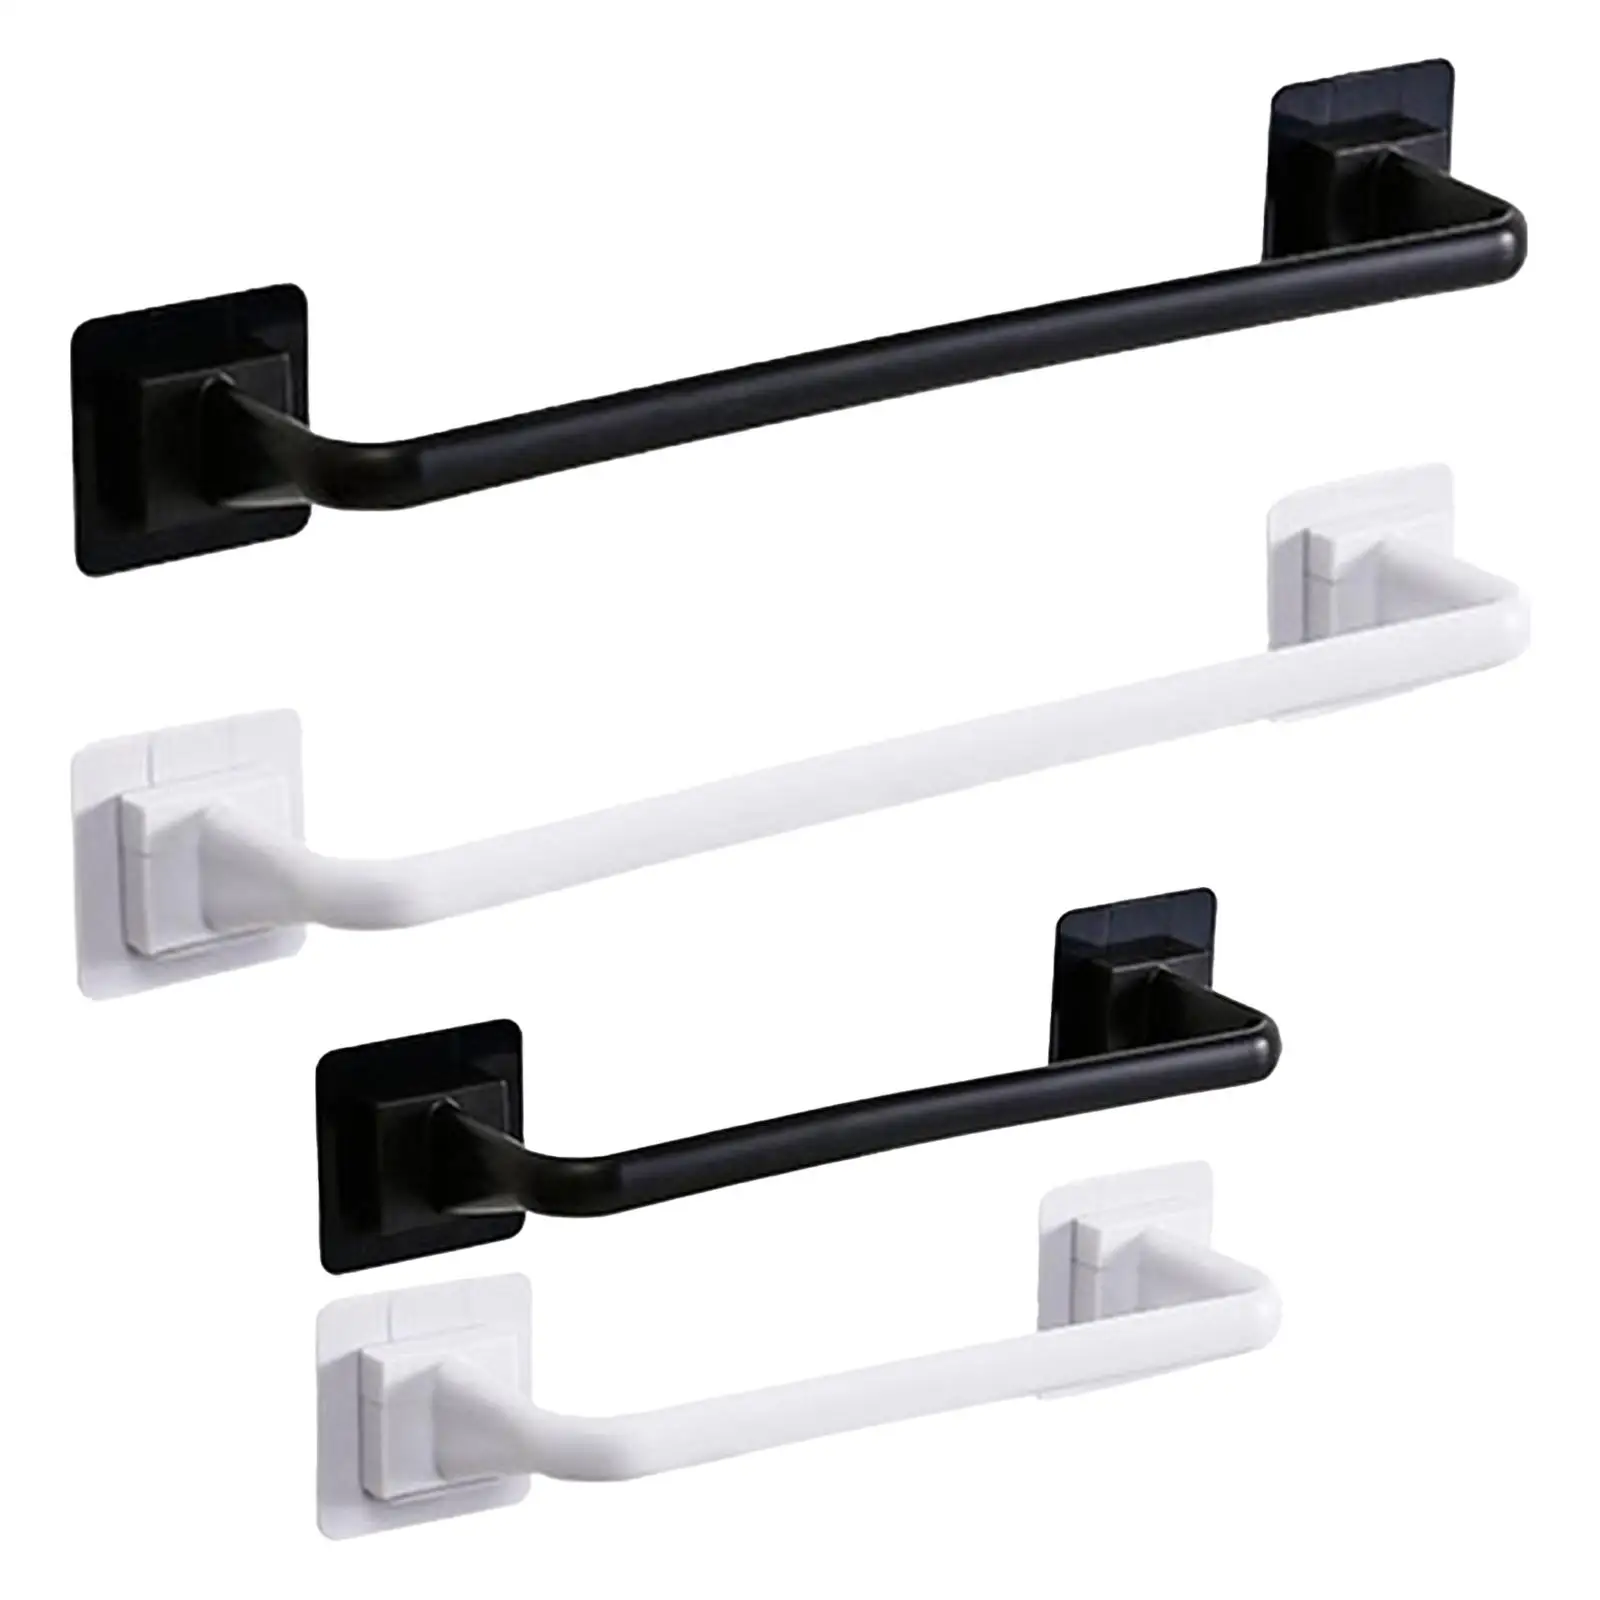 Stable Over Cabinet Towel Bar Easy to Clean Rack Decorative Organizer Shelf Hand Towel Holder Towel Rail for Wall